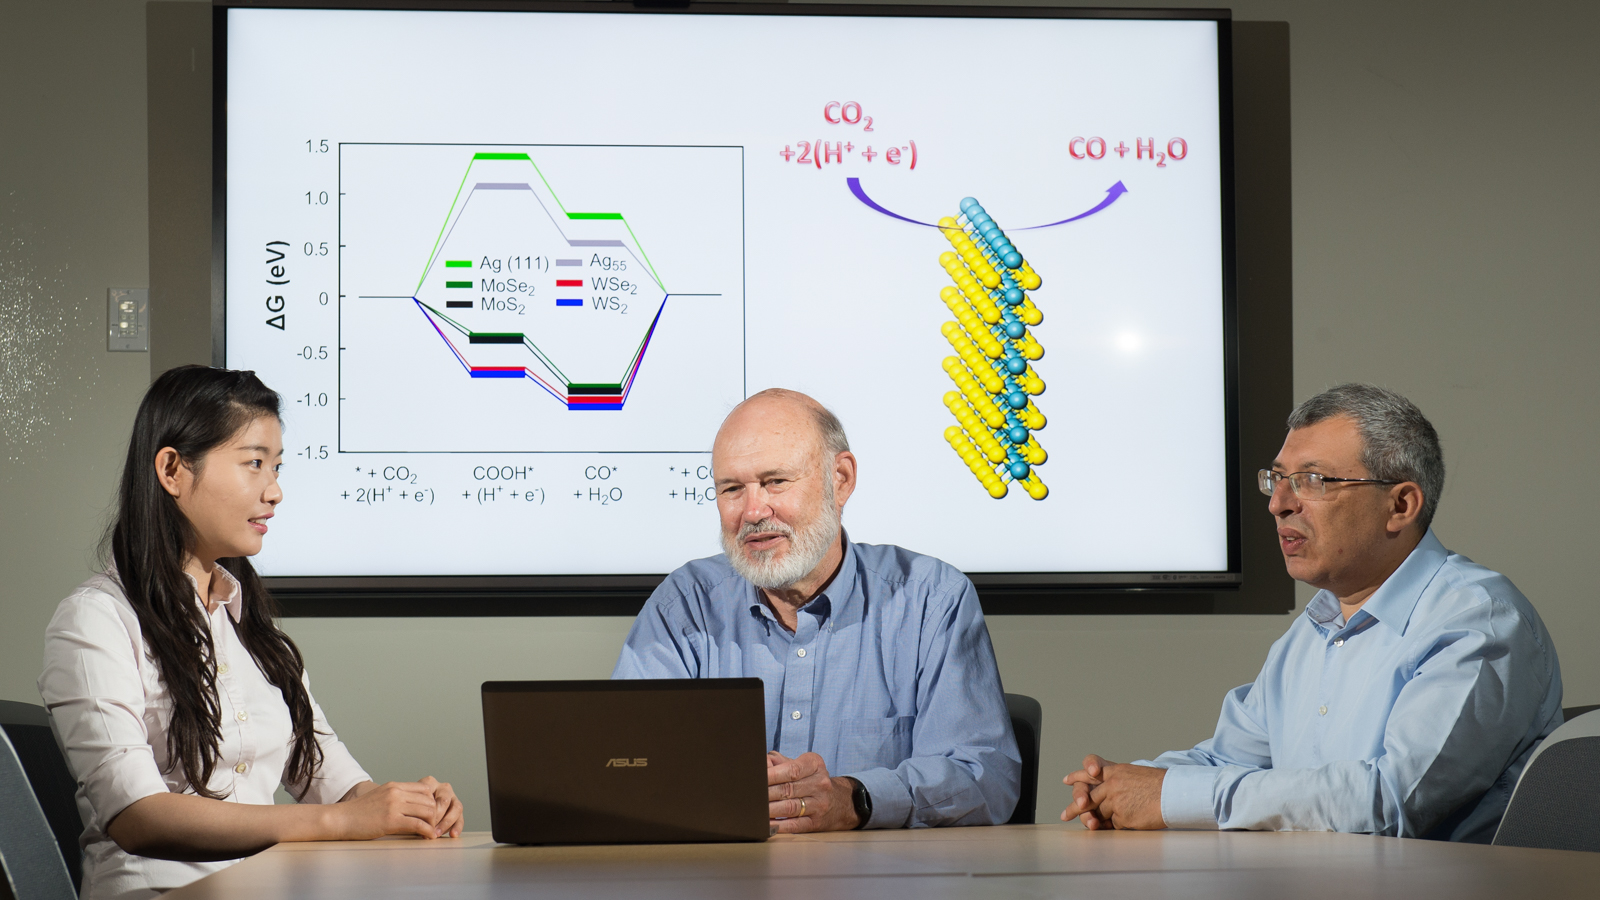 Argonne postdoctoral researcher Cong Liu and chemists Larry Curtiss and Peter Zapol discuss their recent research results on converting carbon dioxide into usable fuel.